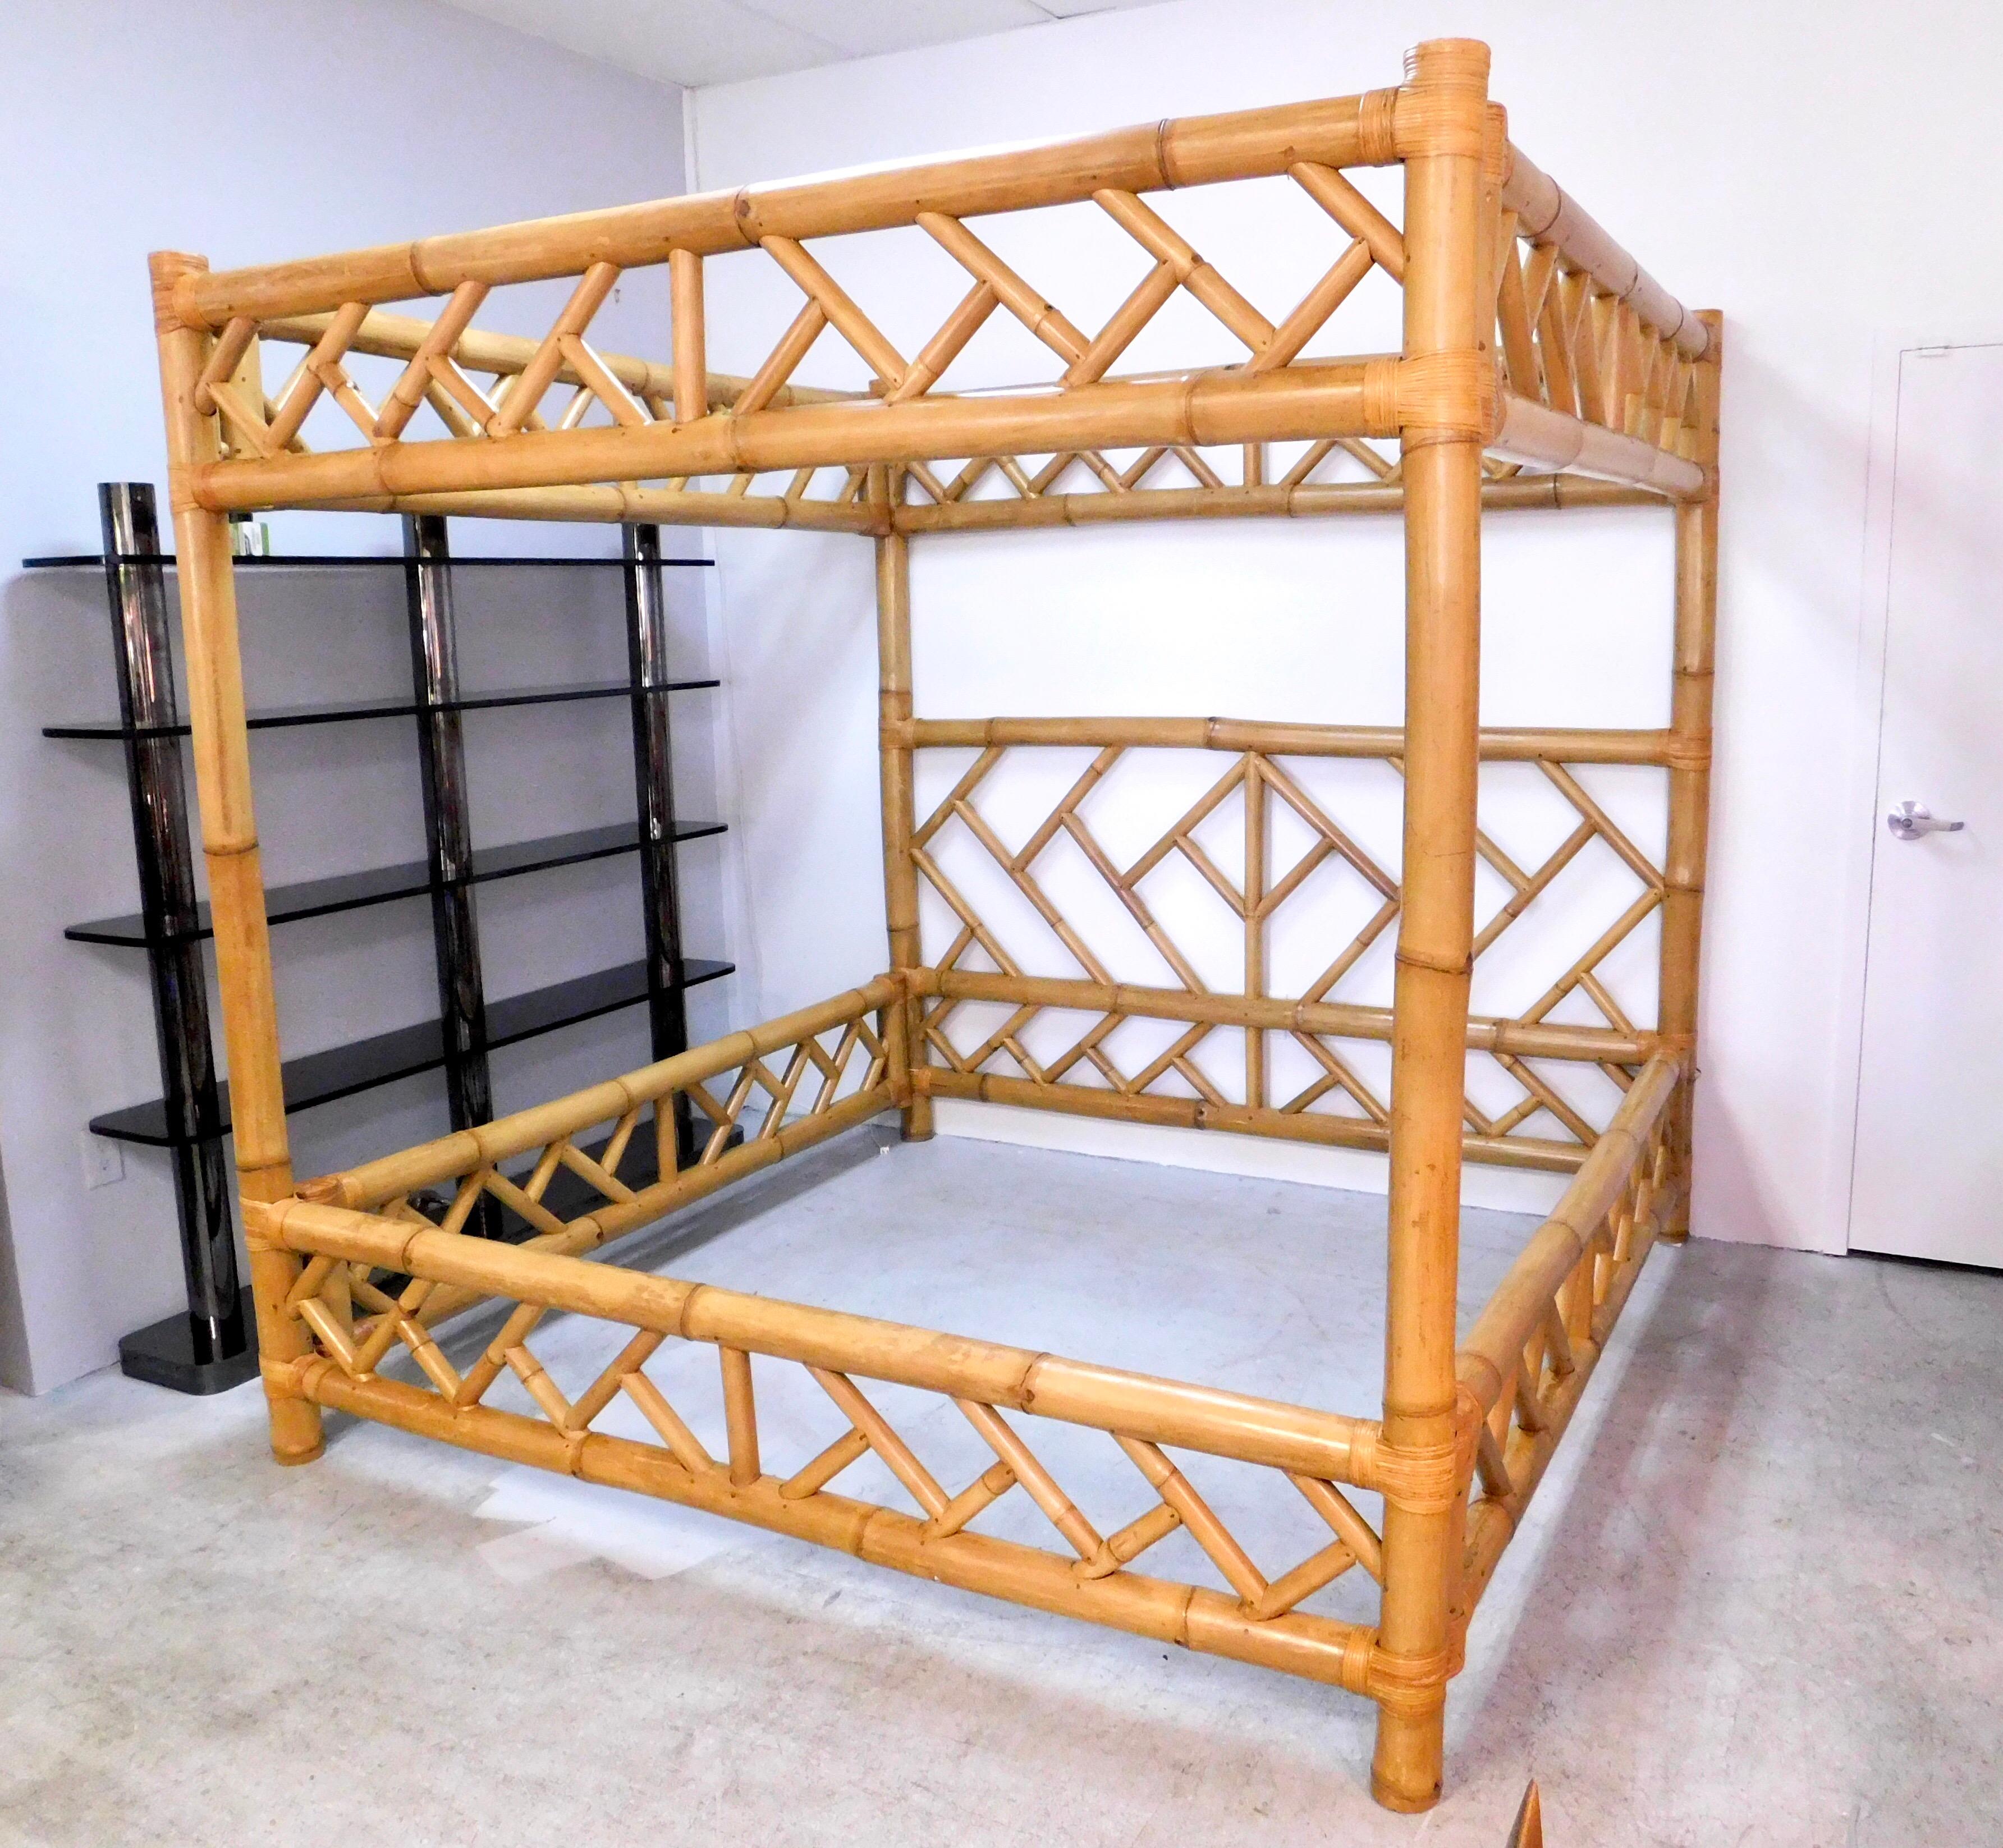 Spectacular vintage bamboo bed. The elements are chunky and the design is timeless.
Room inside is 80